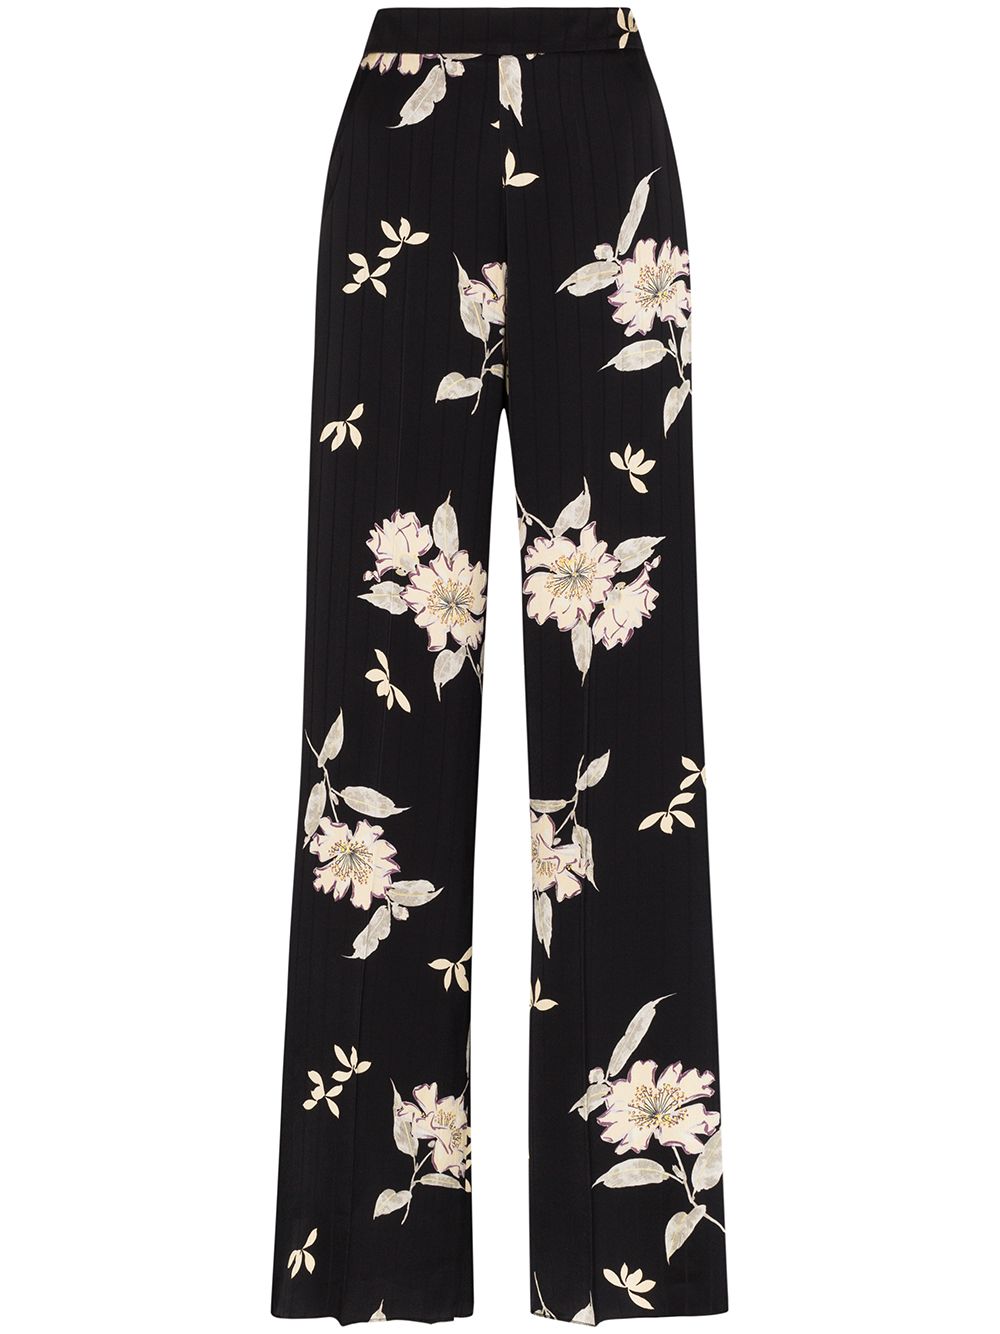 ETRO FLORAL PRINT STRIPED PALAZZO TROUSERS